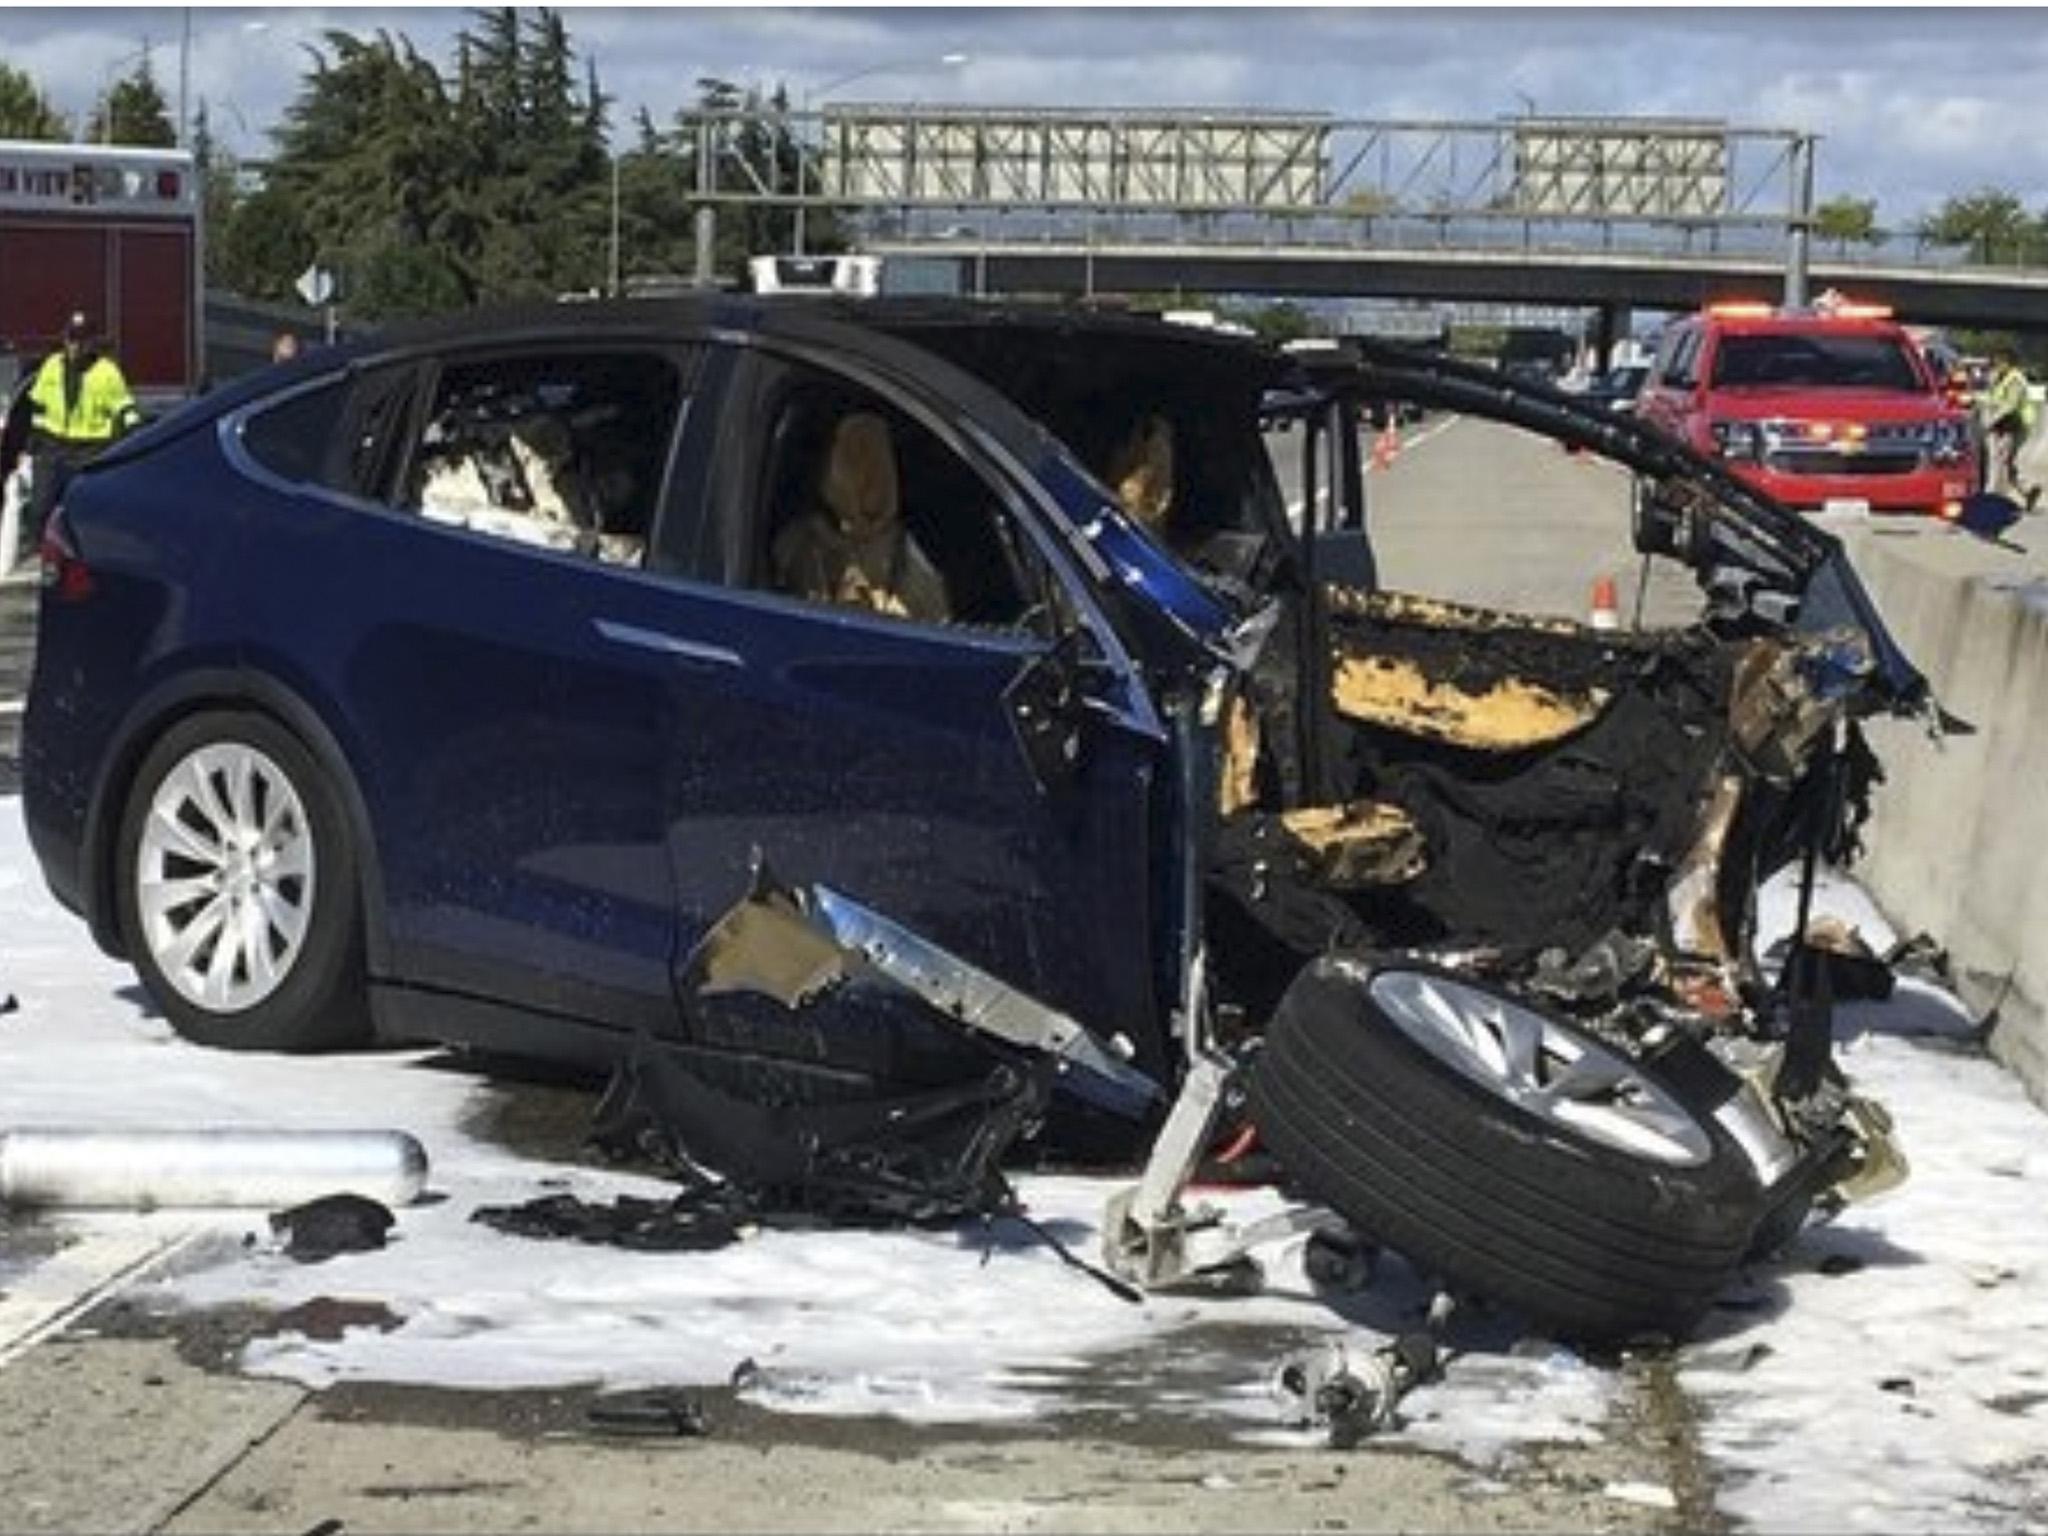 A Tesla vehicle that caught fire following an accident in the US in 2018